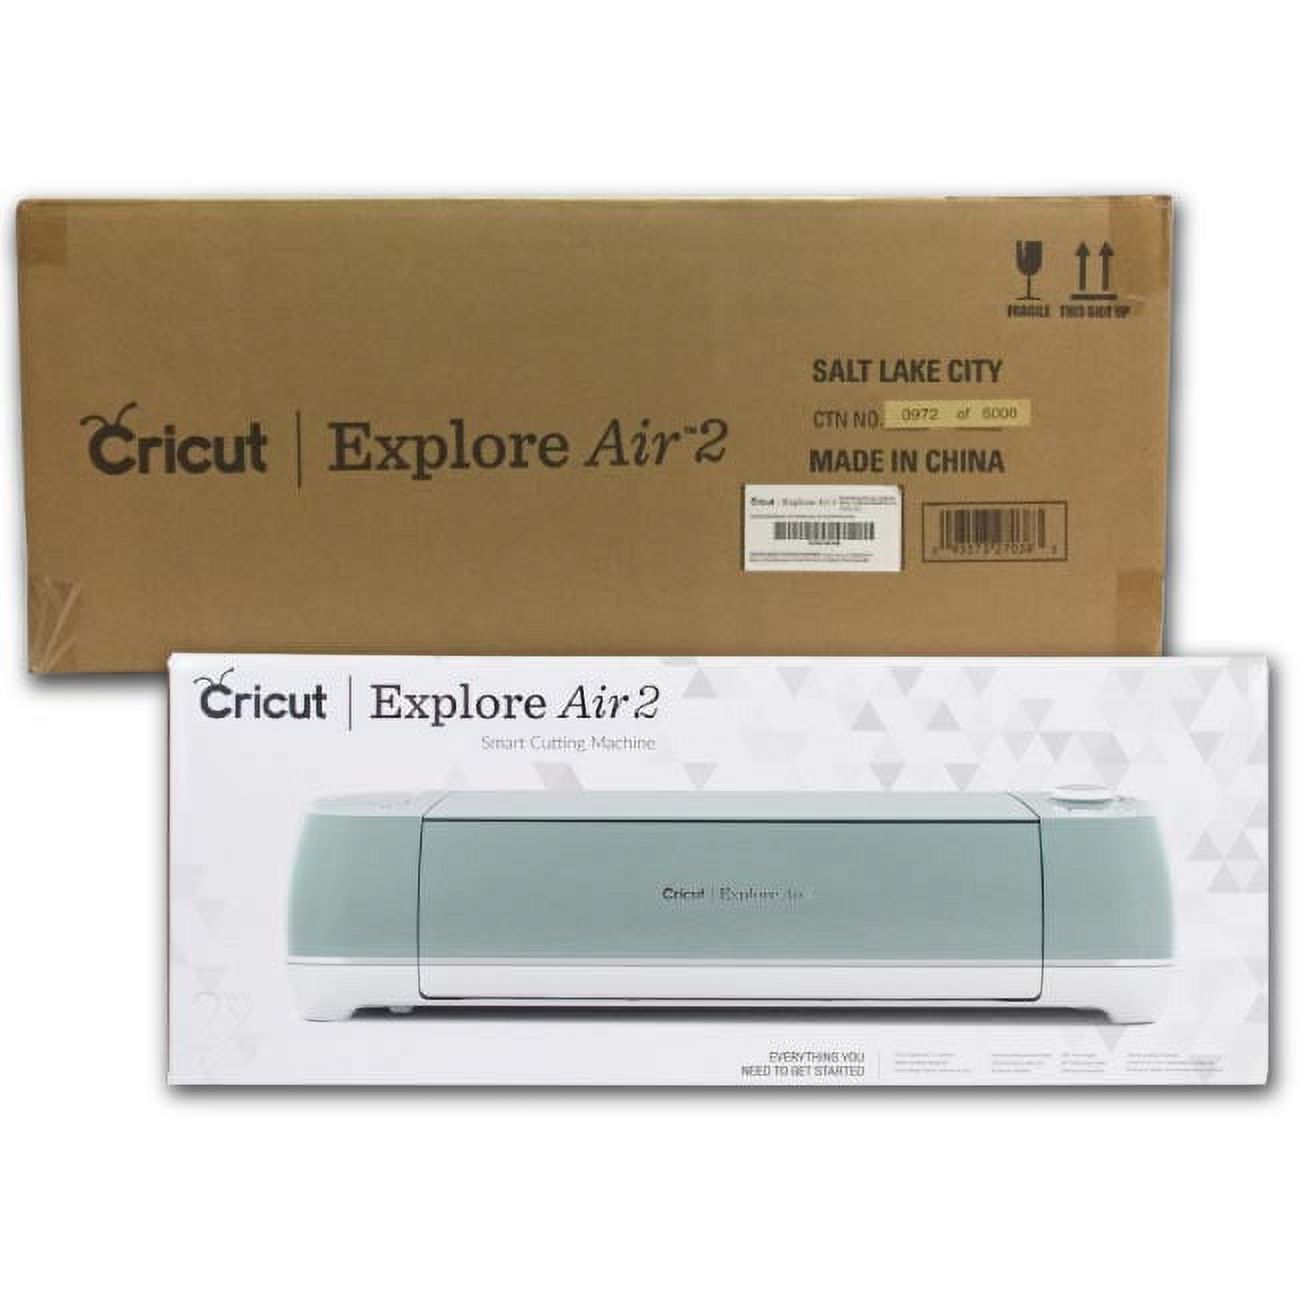 Cricut Explore Air 2 Machine with Iron-On and Vinyl Sampler Packs, Tool Set and Pens Bundle - image 4 of 7